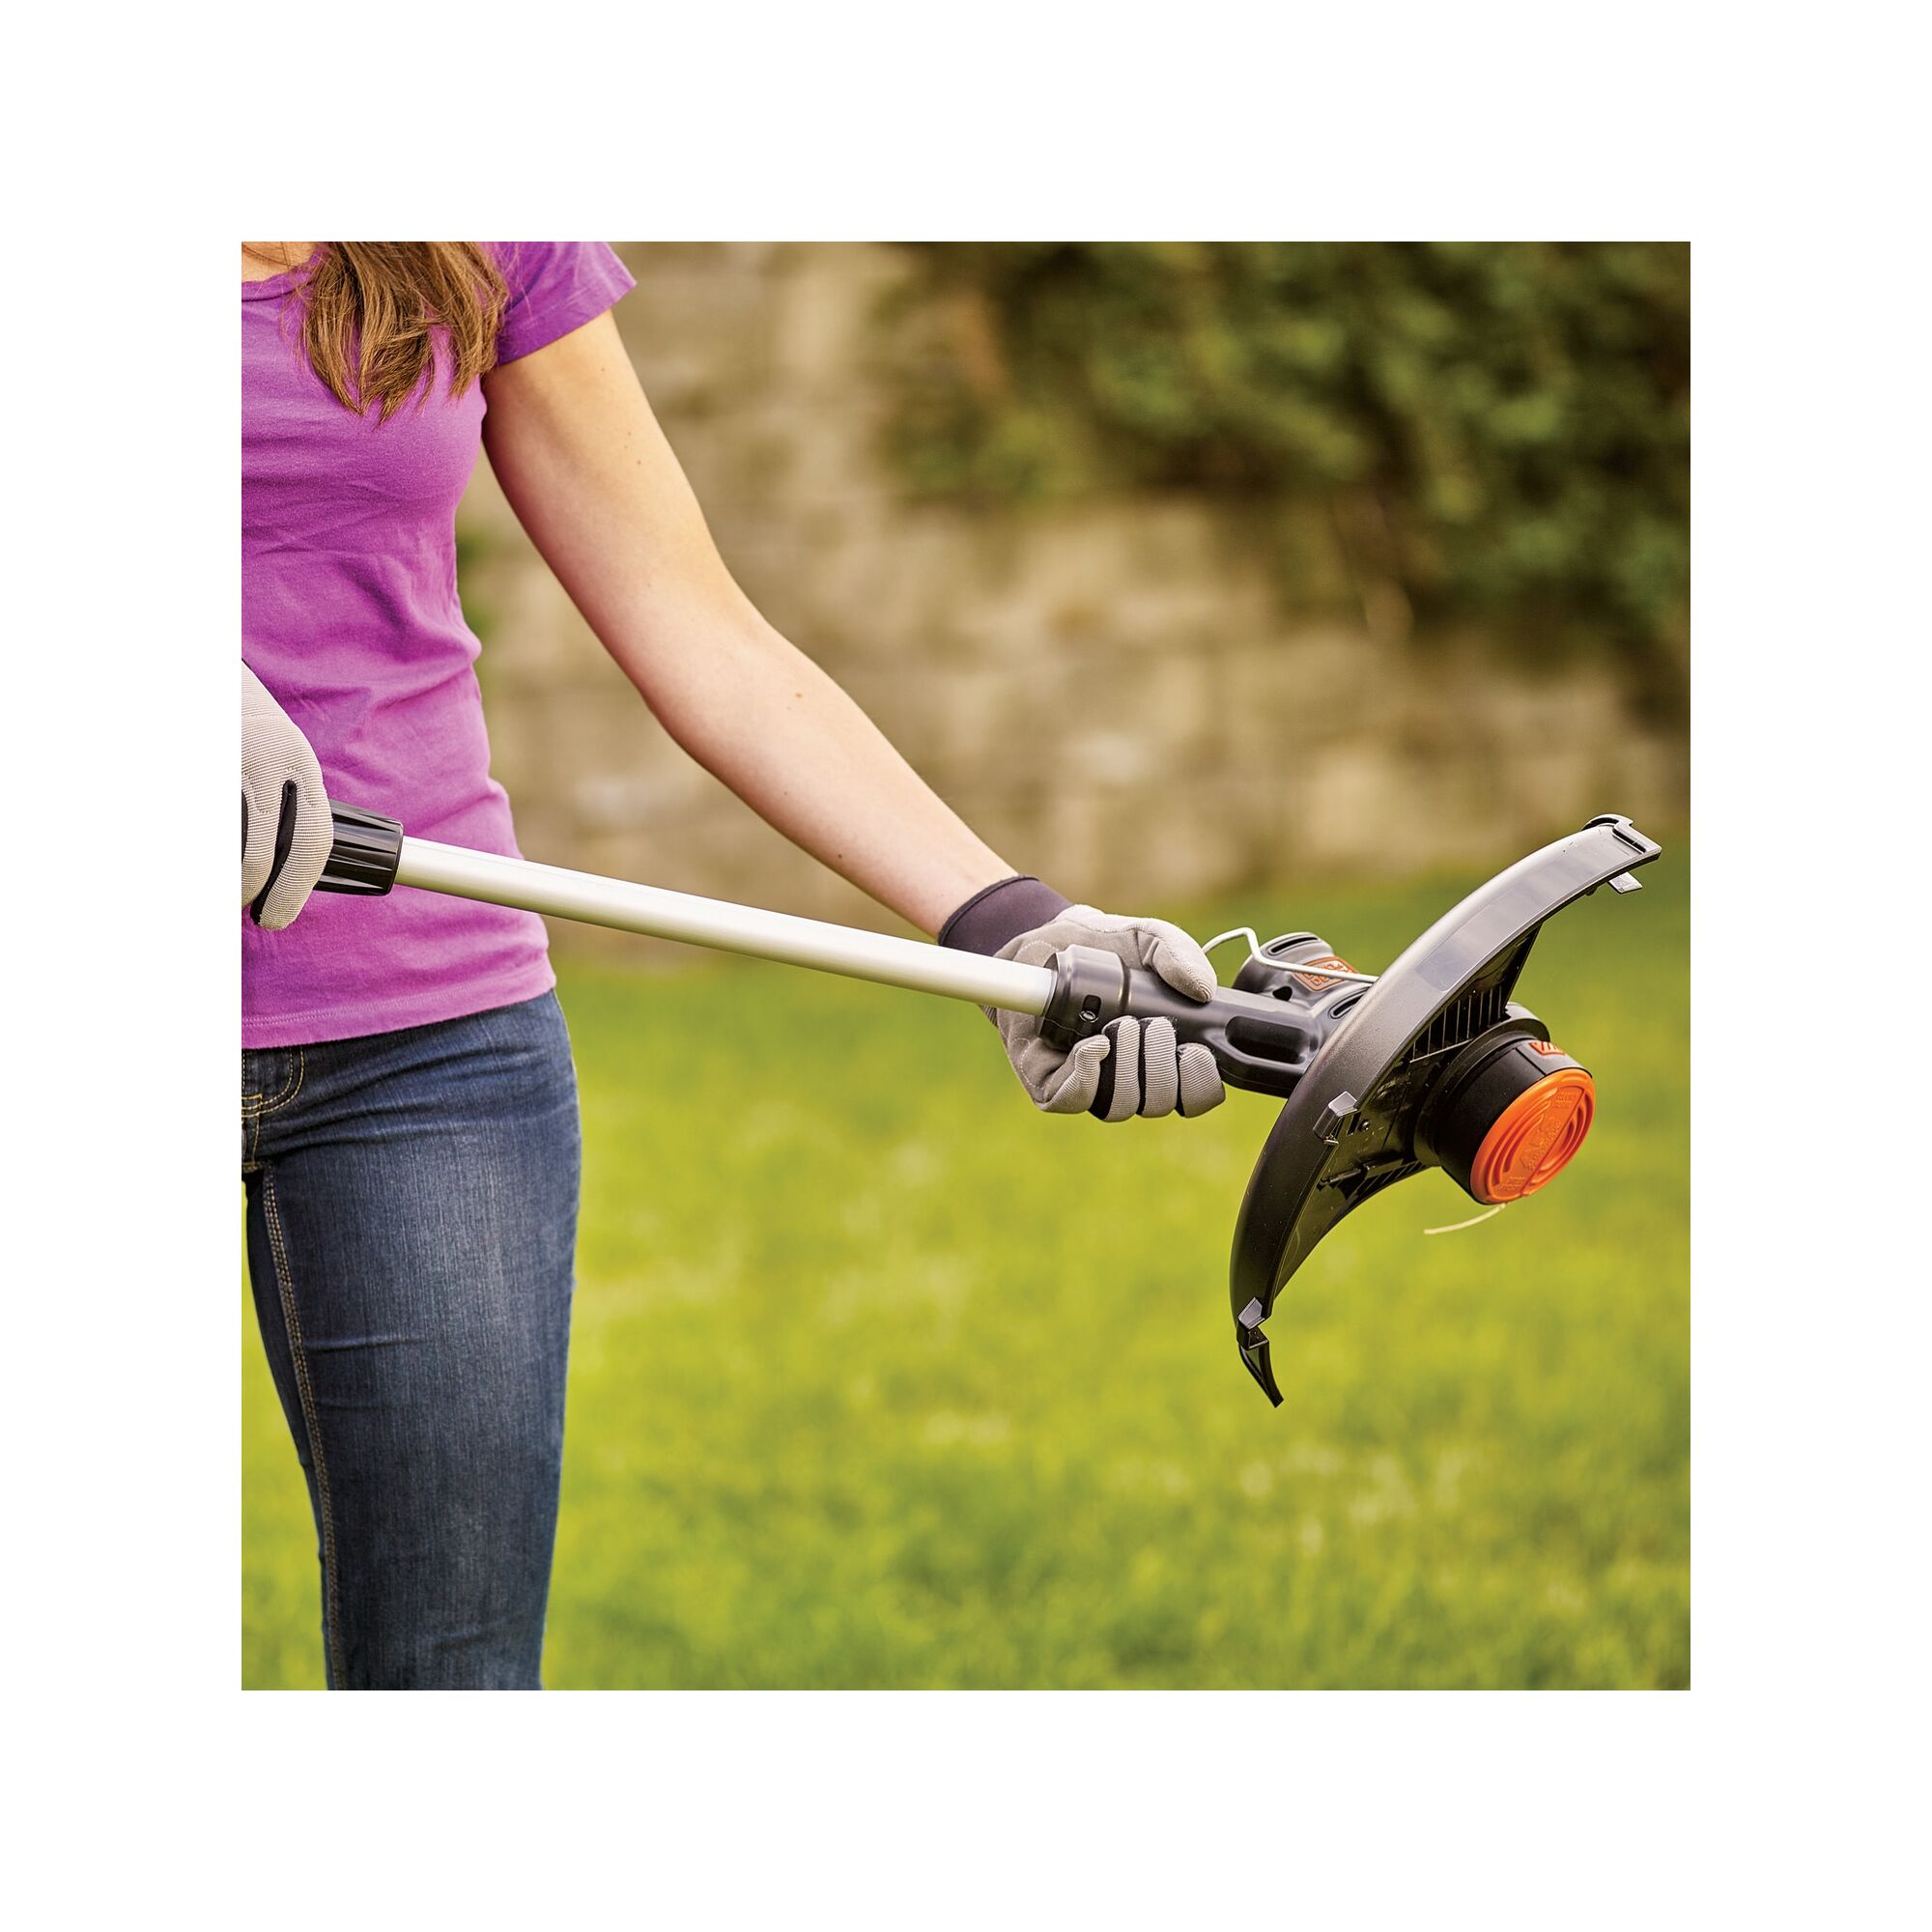 Woman holding string trimmer